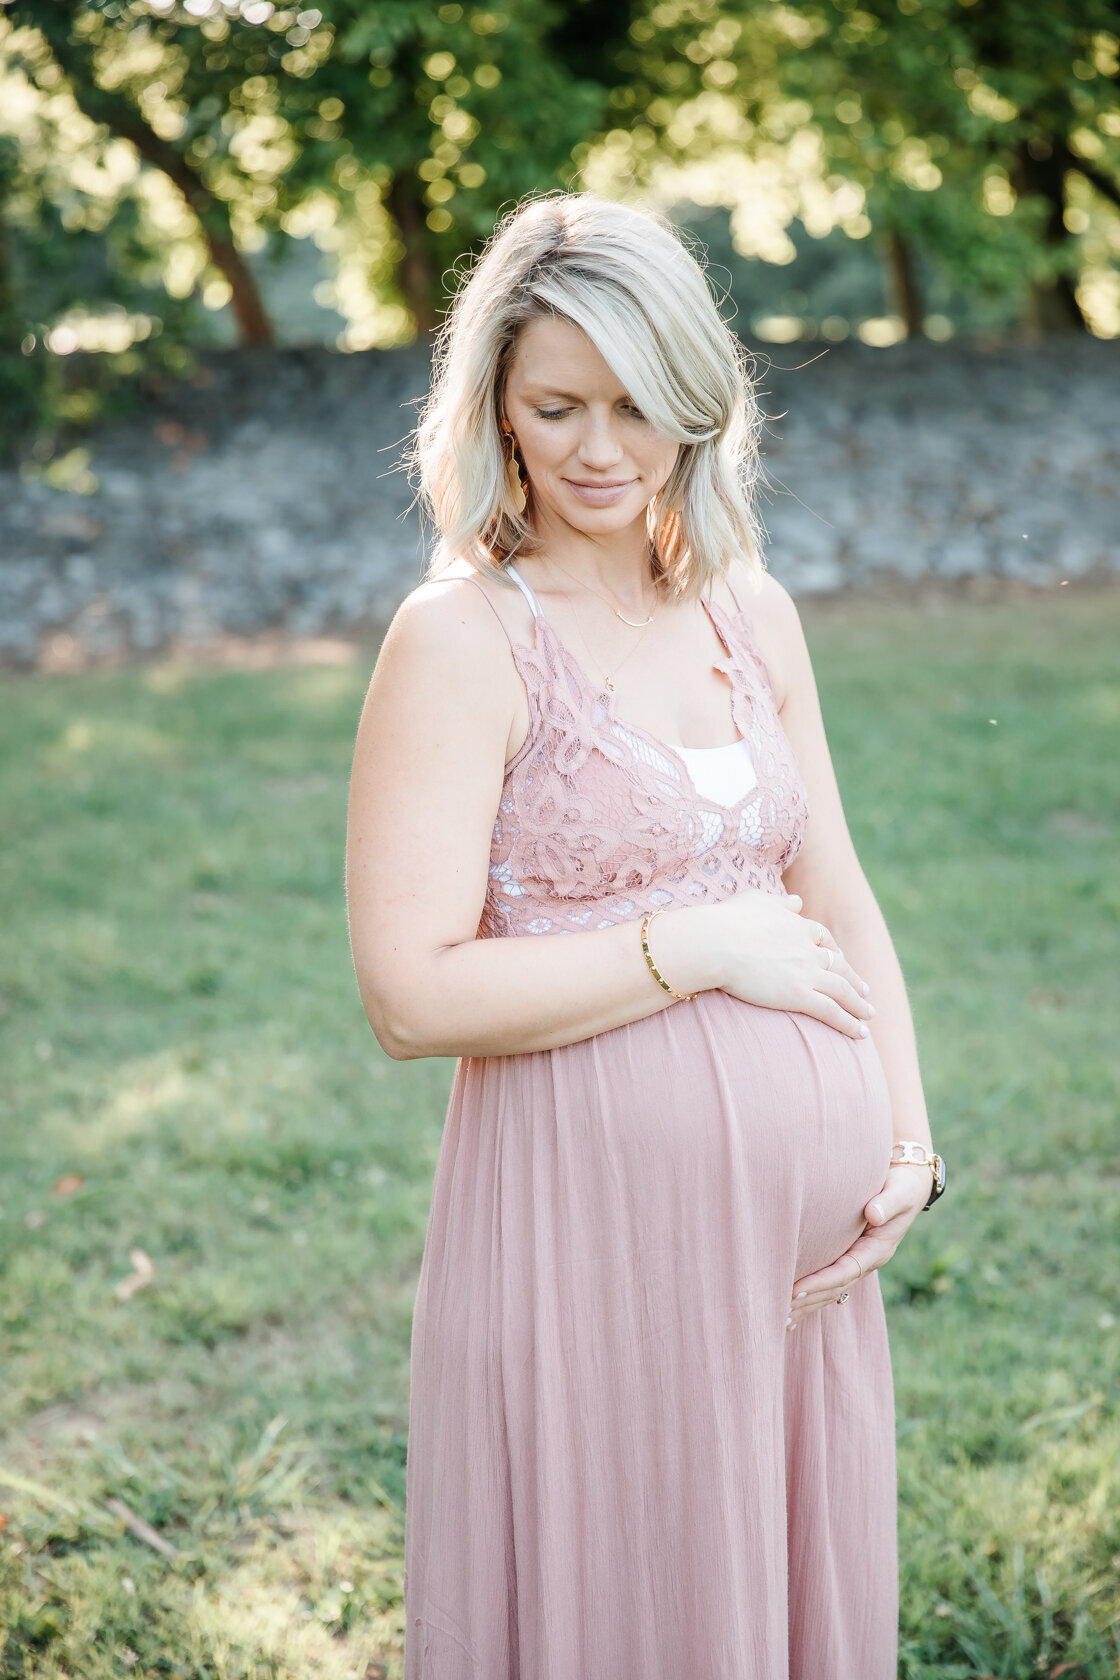 Knoxville-maternity-Photographer-cox-session-Karen-Stone-Photography-28